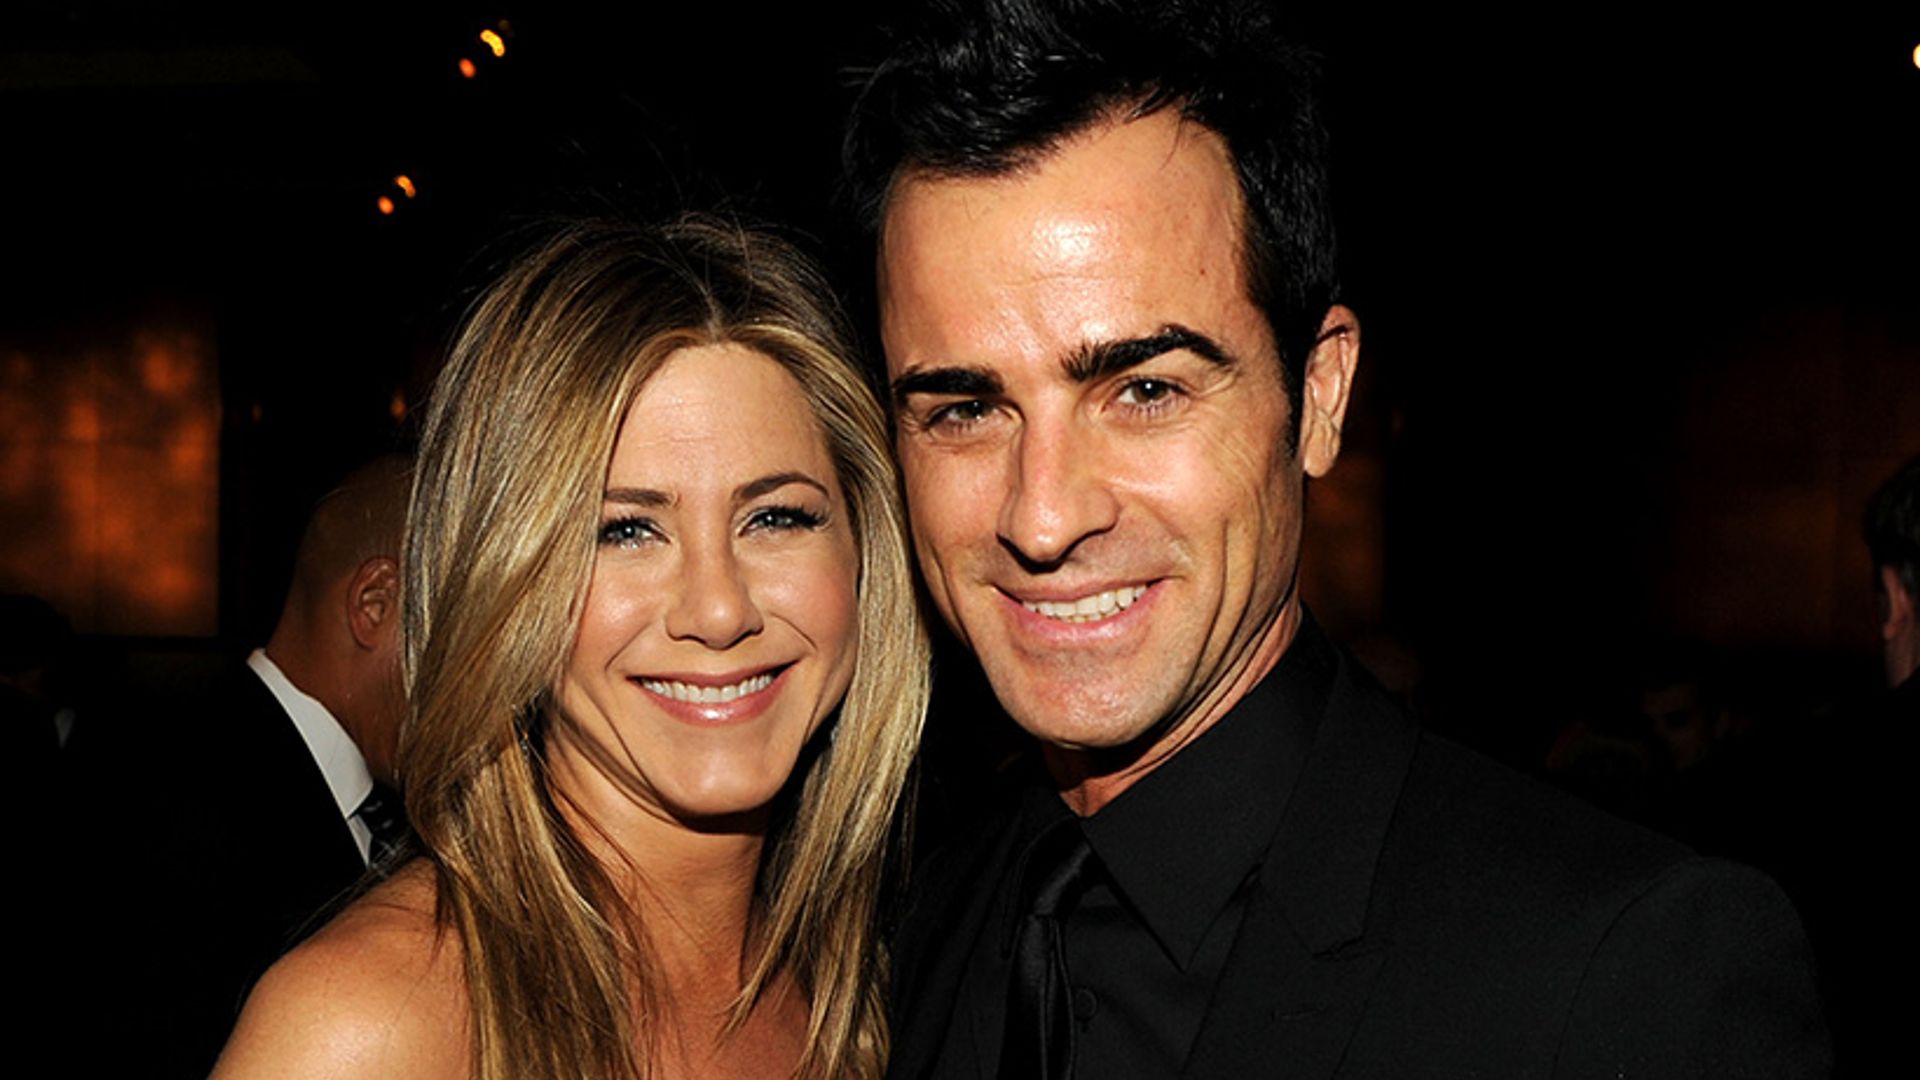 Justin Theroux defends himself from wife's bathroom thief allegations